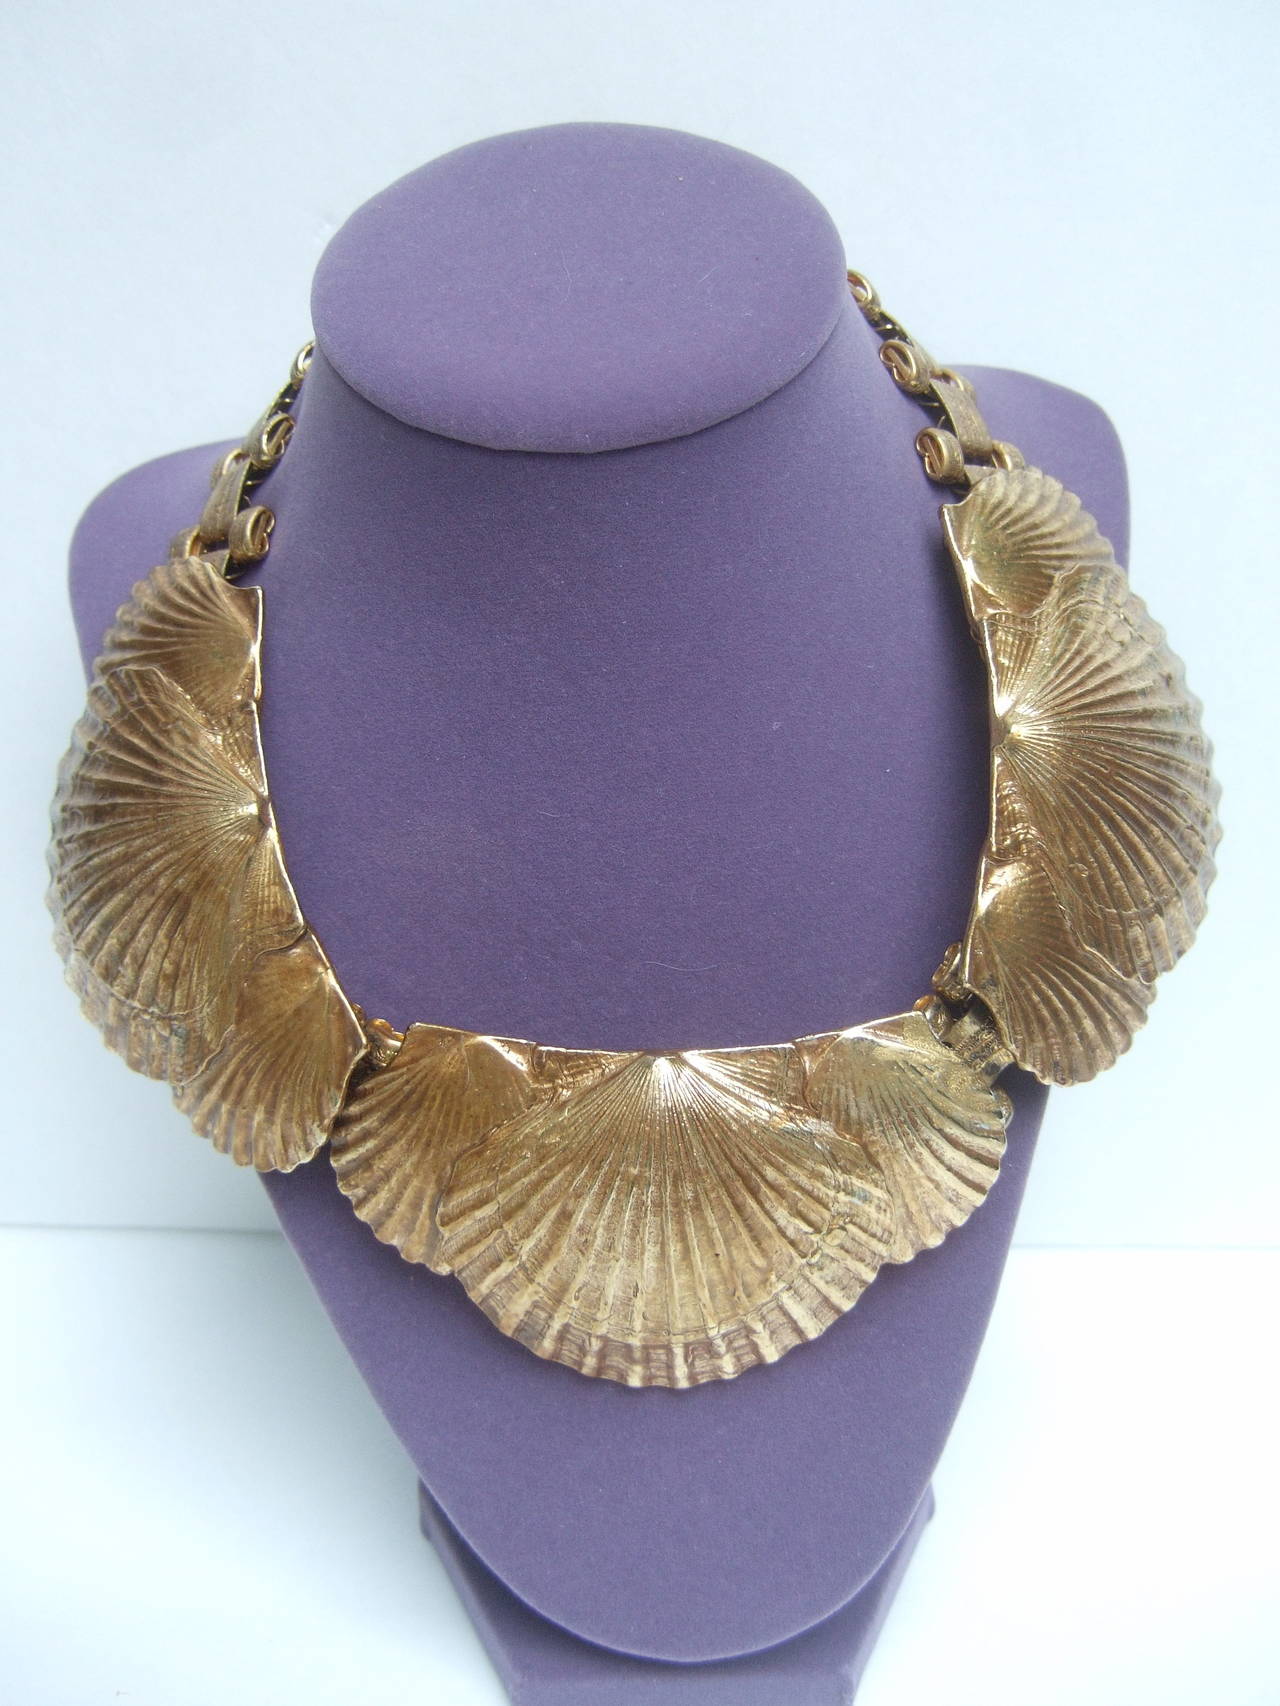 Magnificent Gilt Metal Scallop Shell Choker Necklace Attributed to Line Vautrin  4